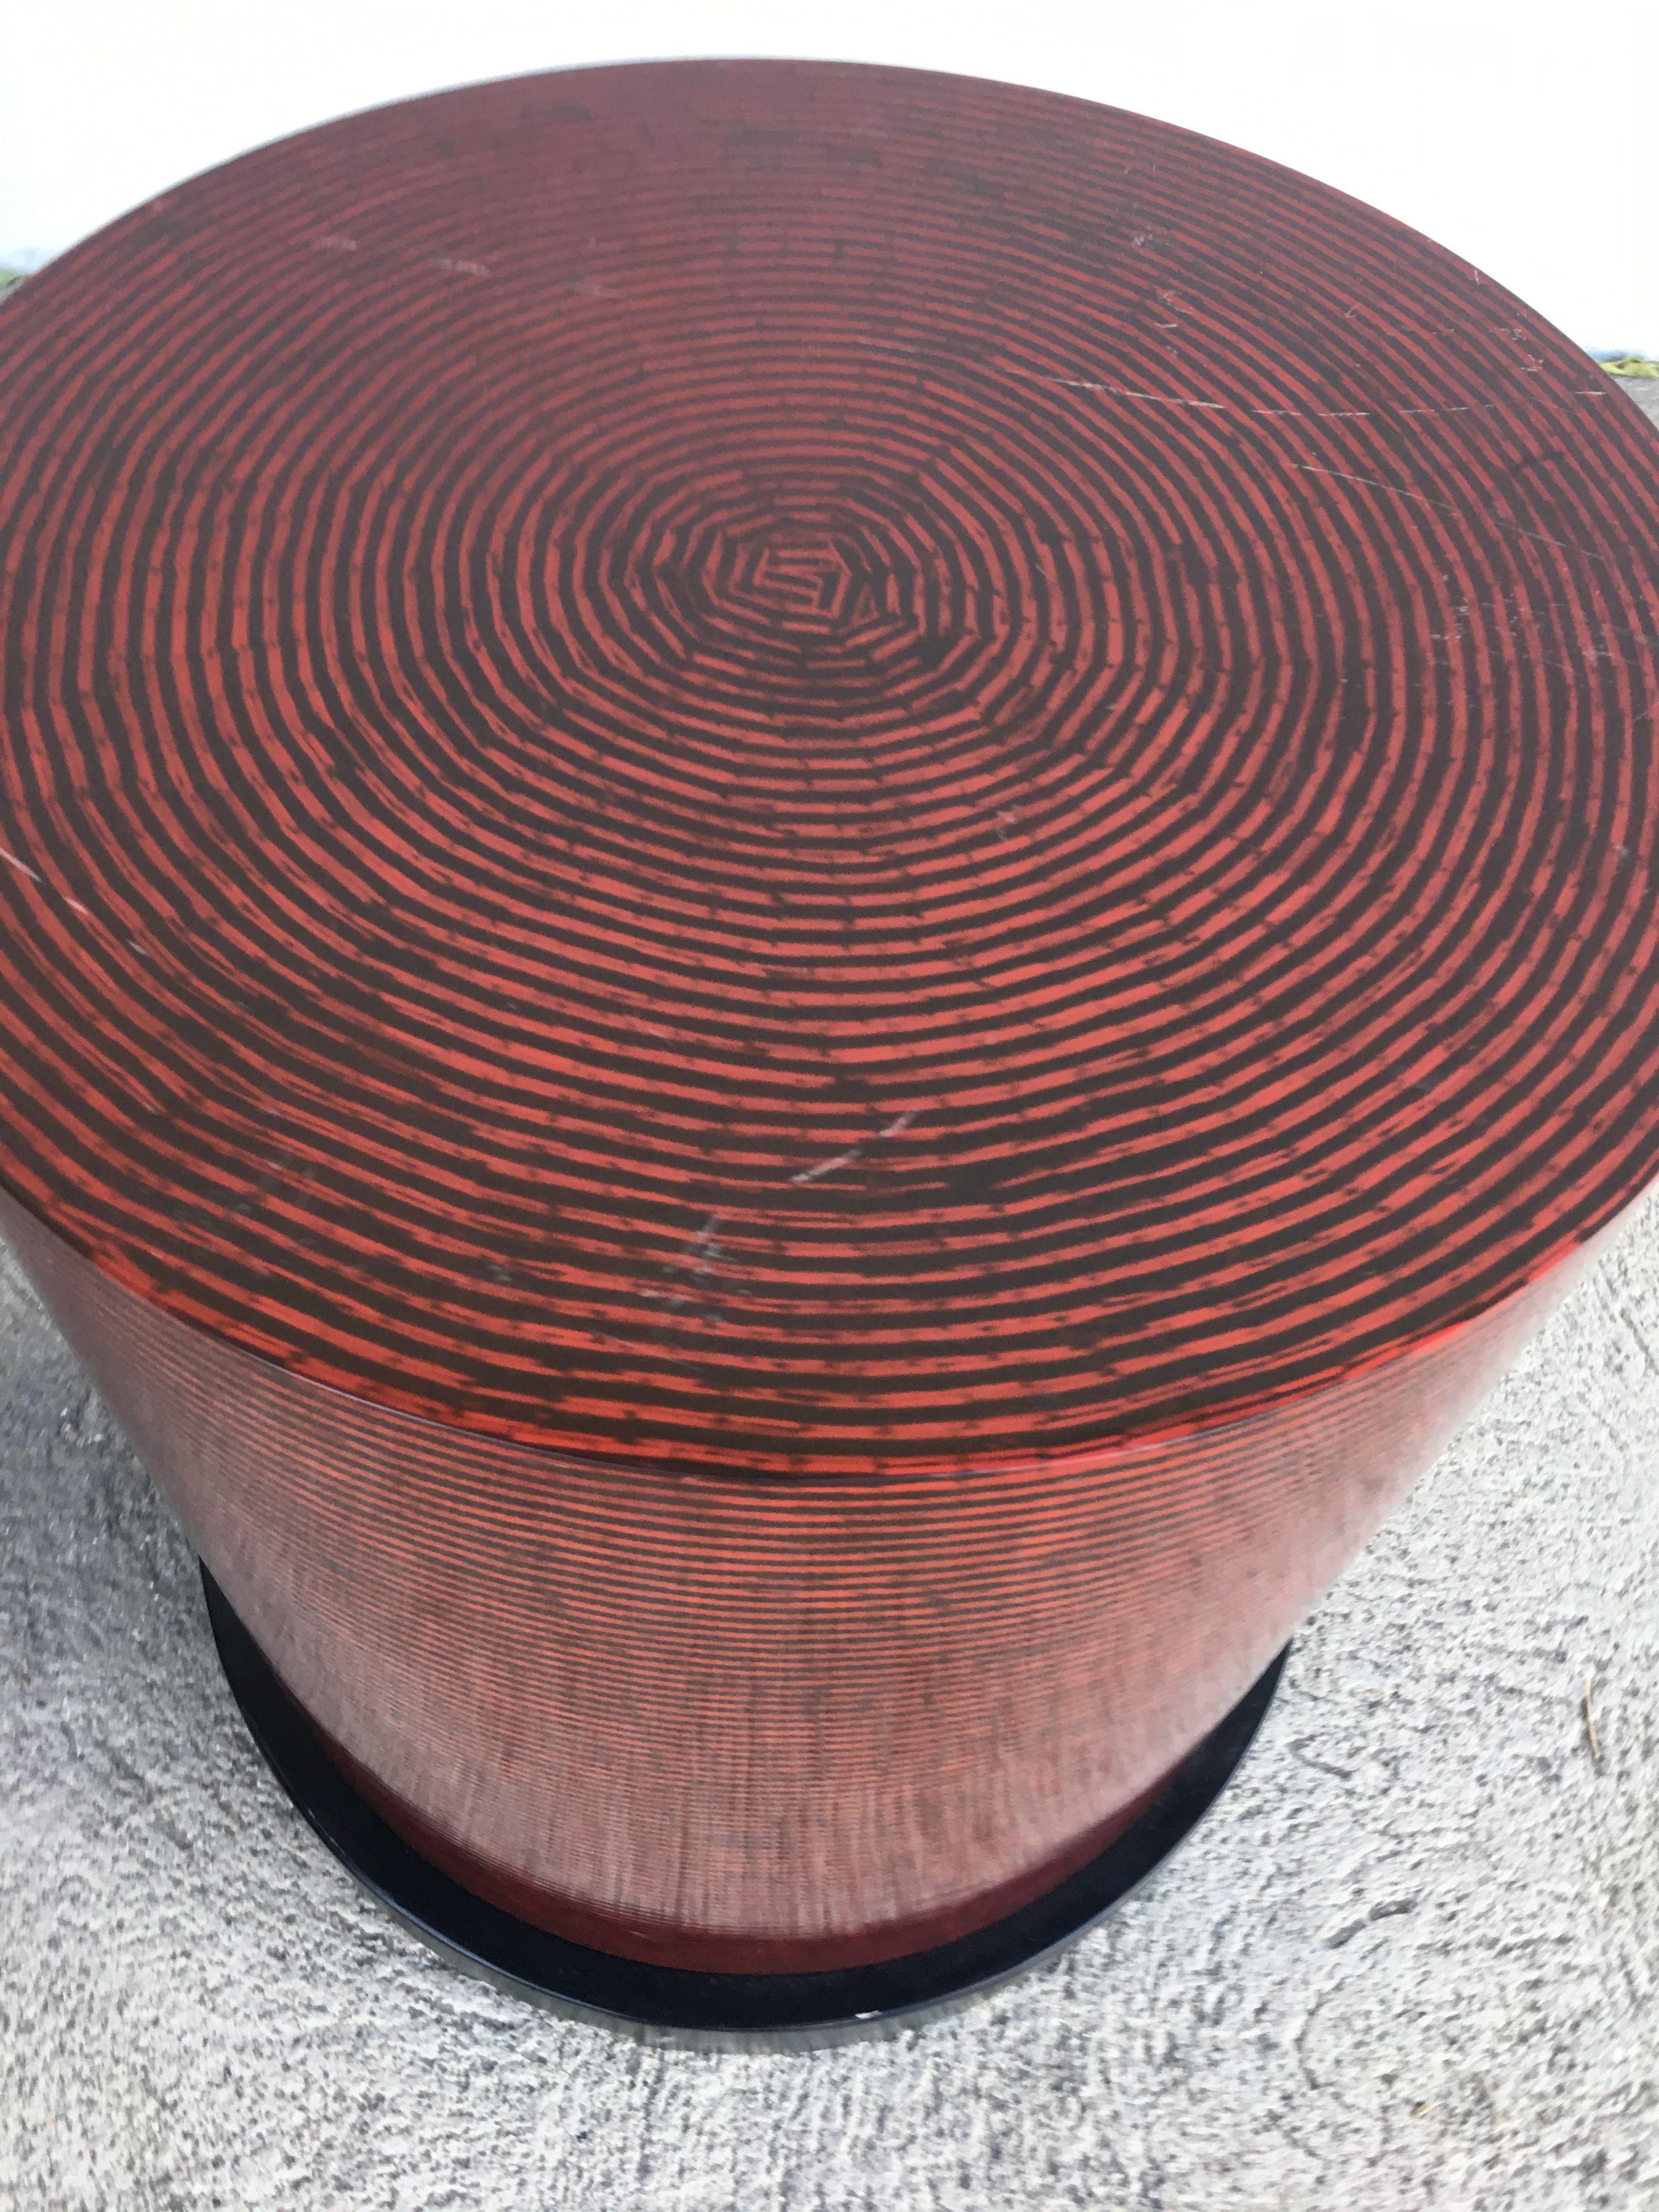 Laminate Two-Tone Cubist Style Round Side Table For Sale